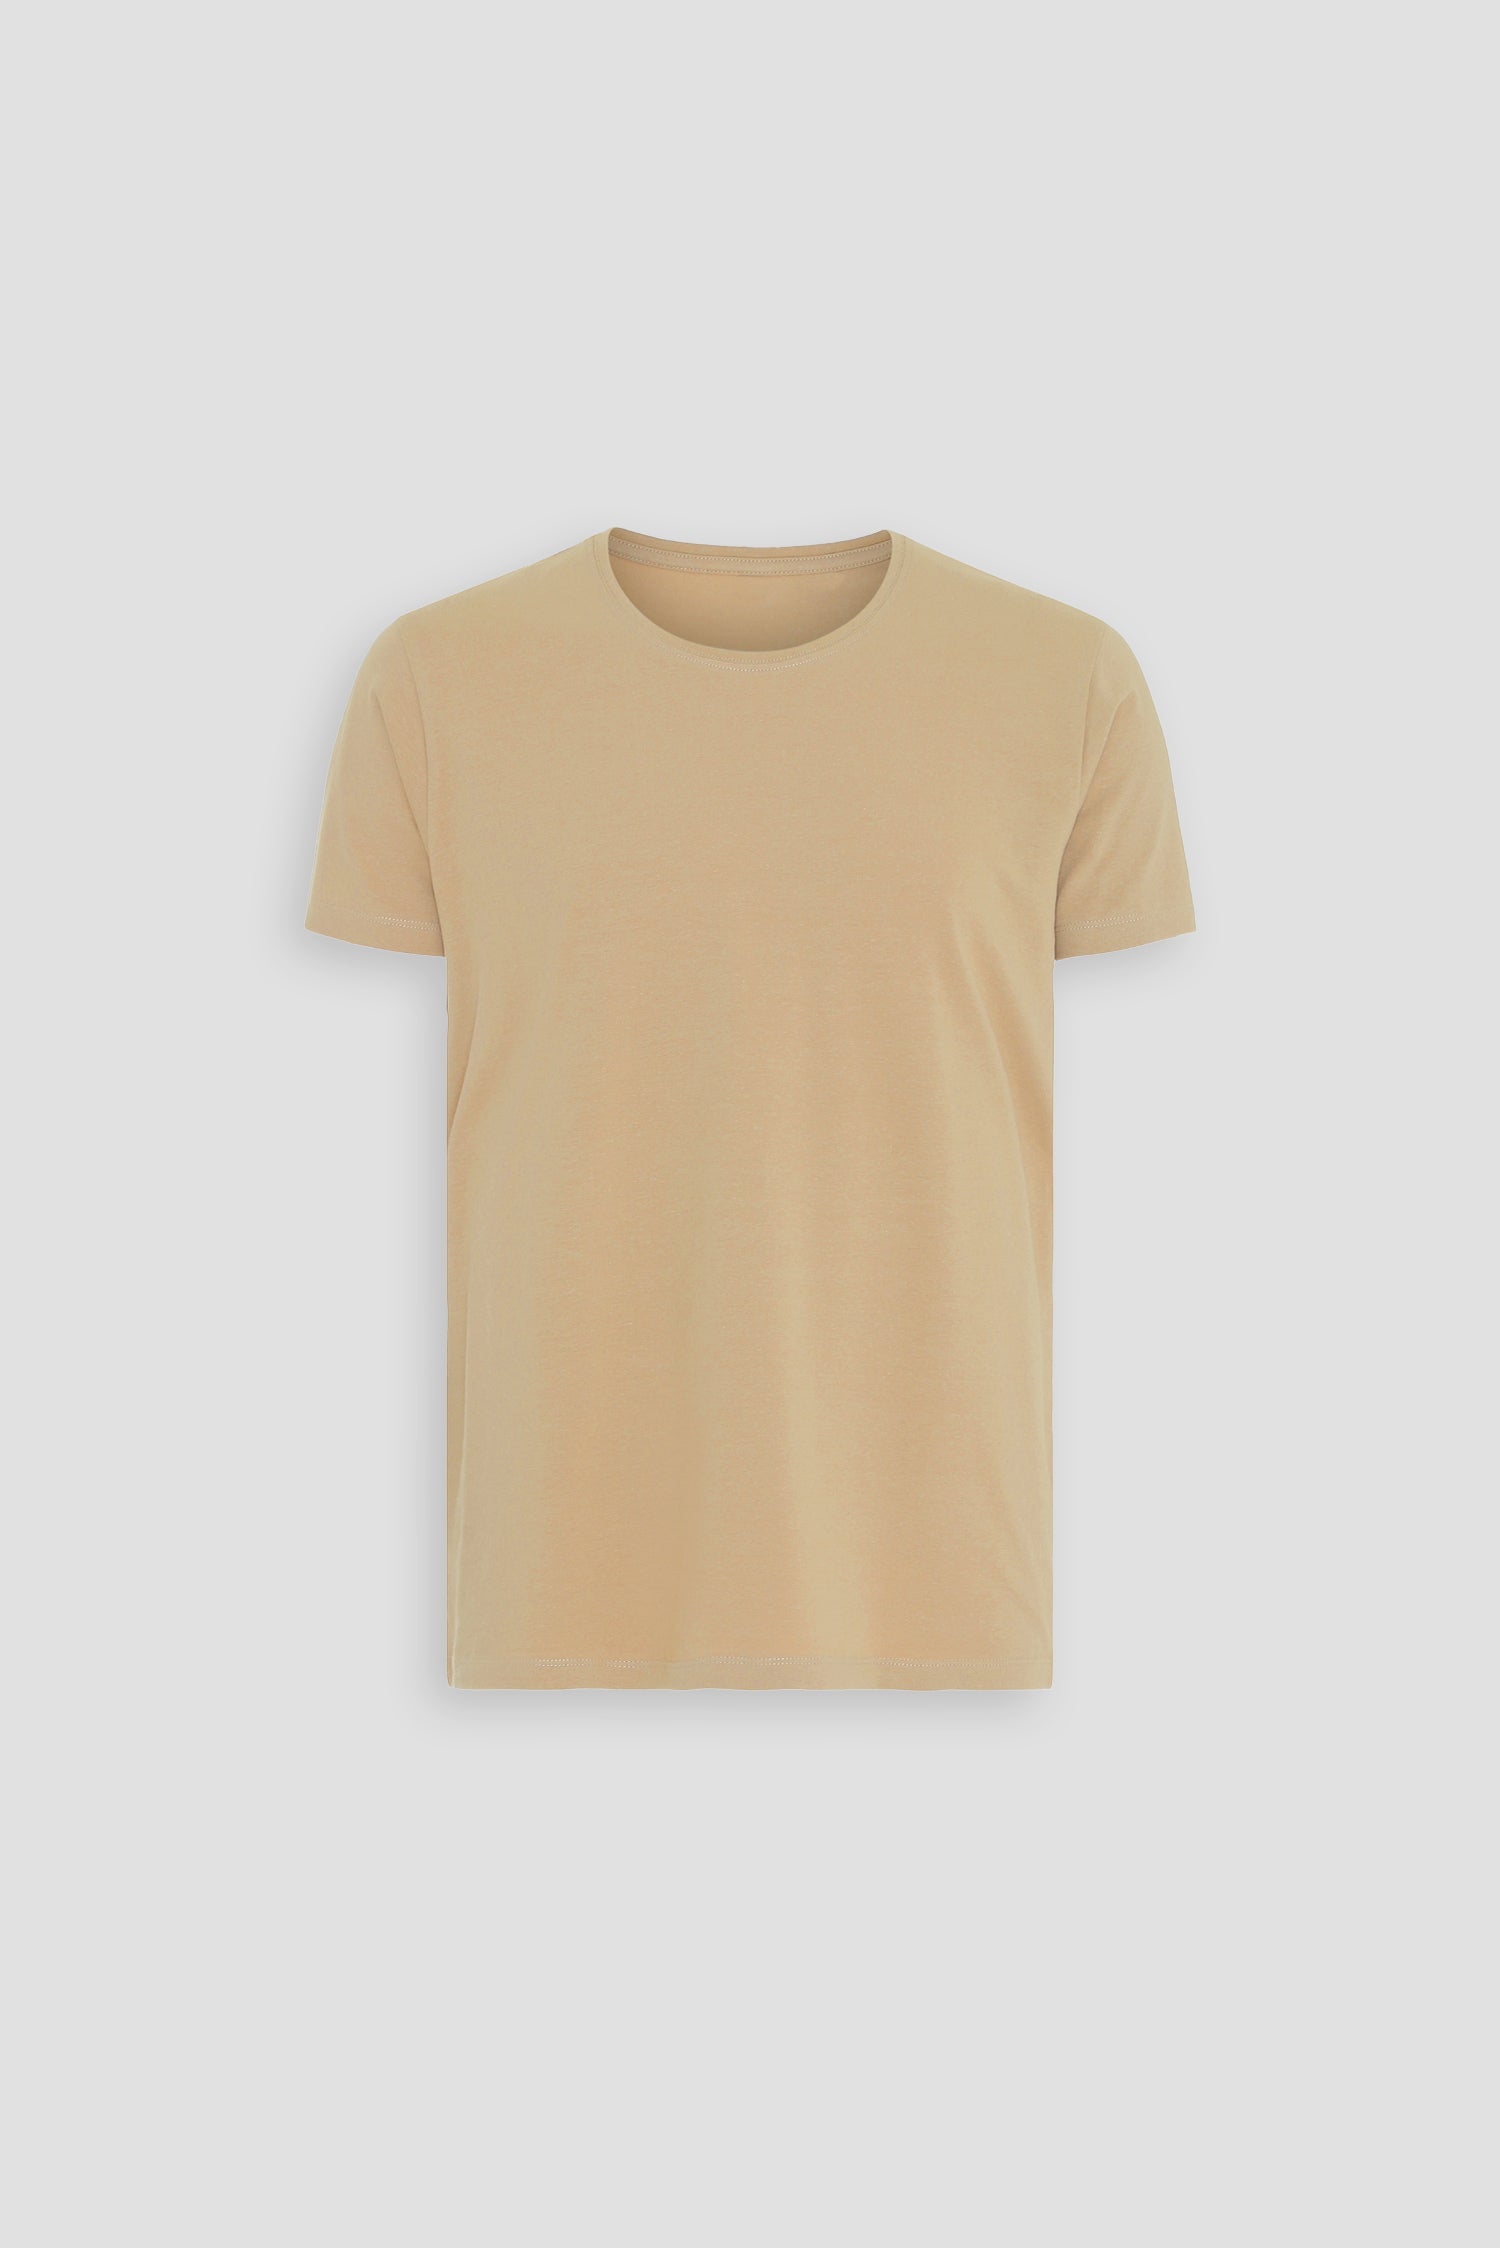 Muscle Fit T-shirt, Sand